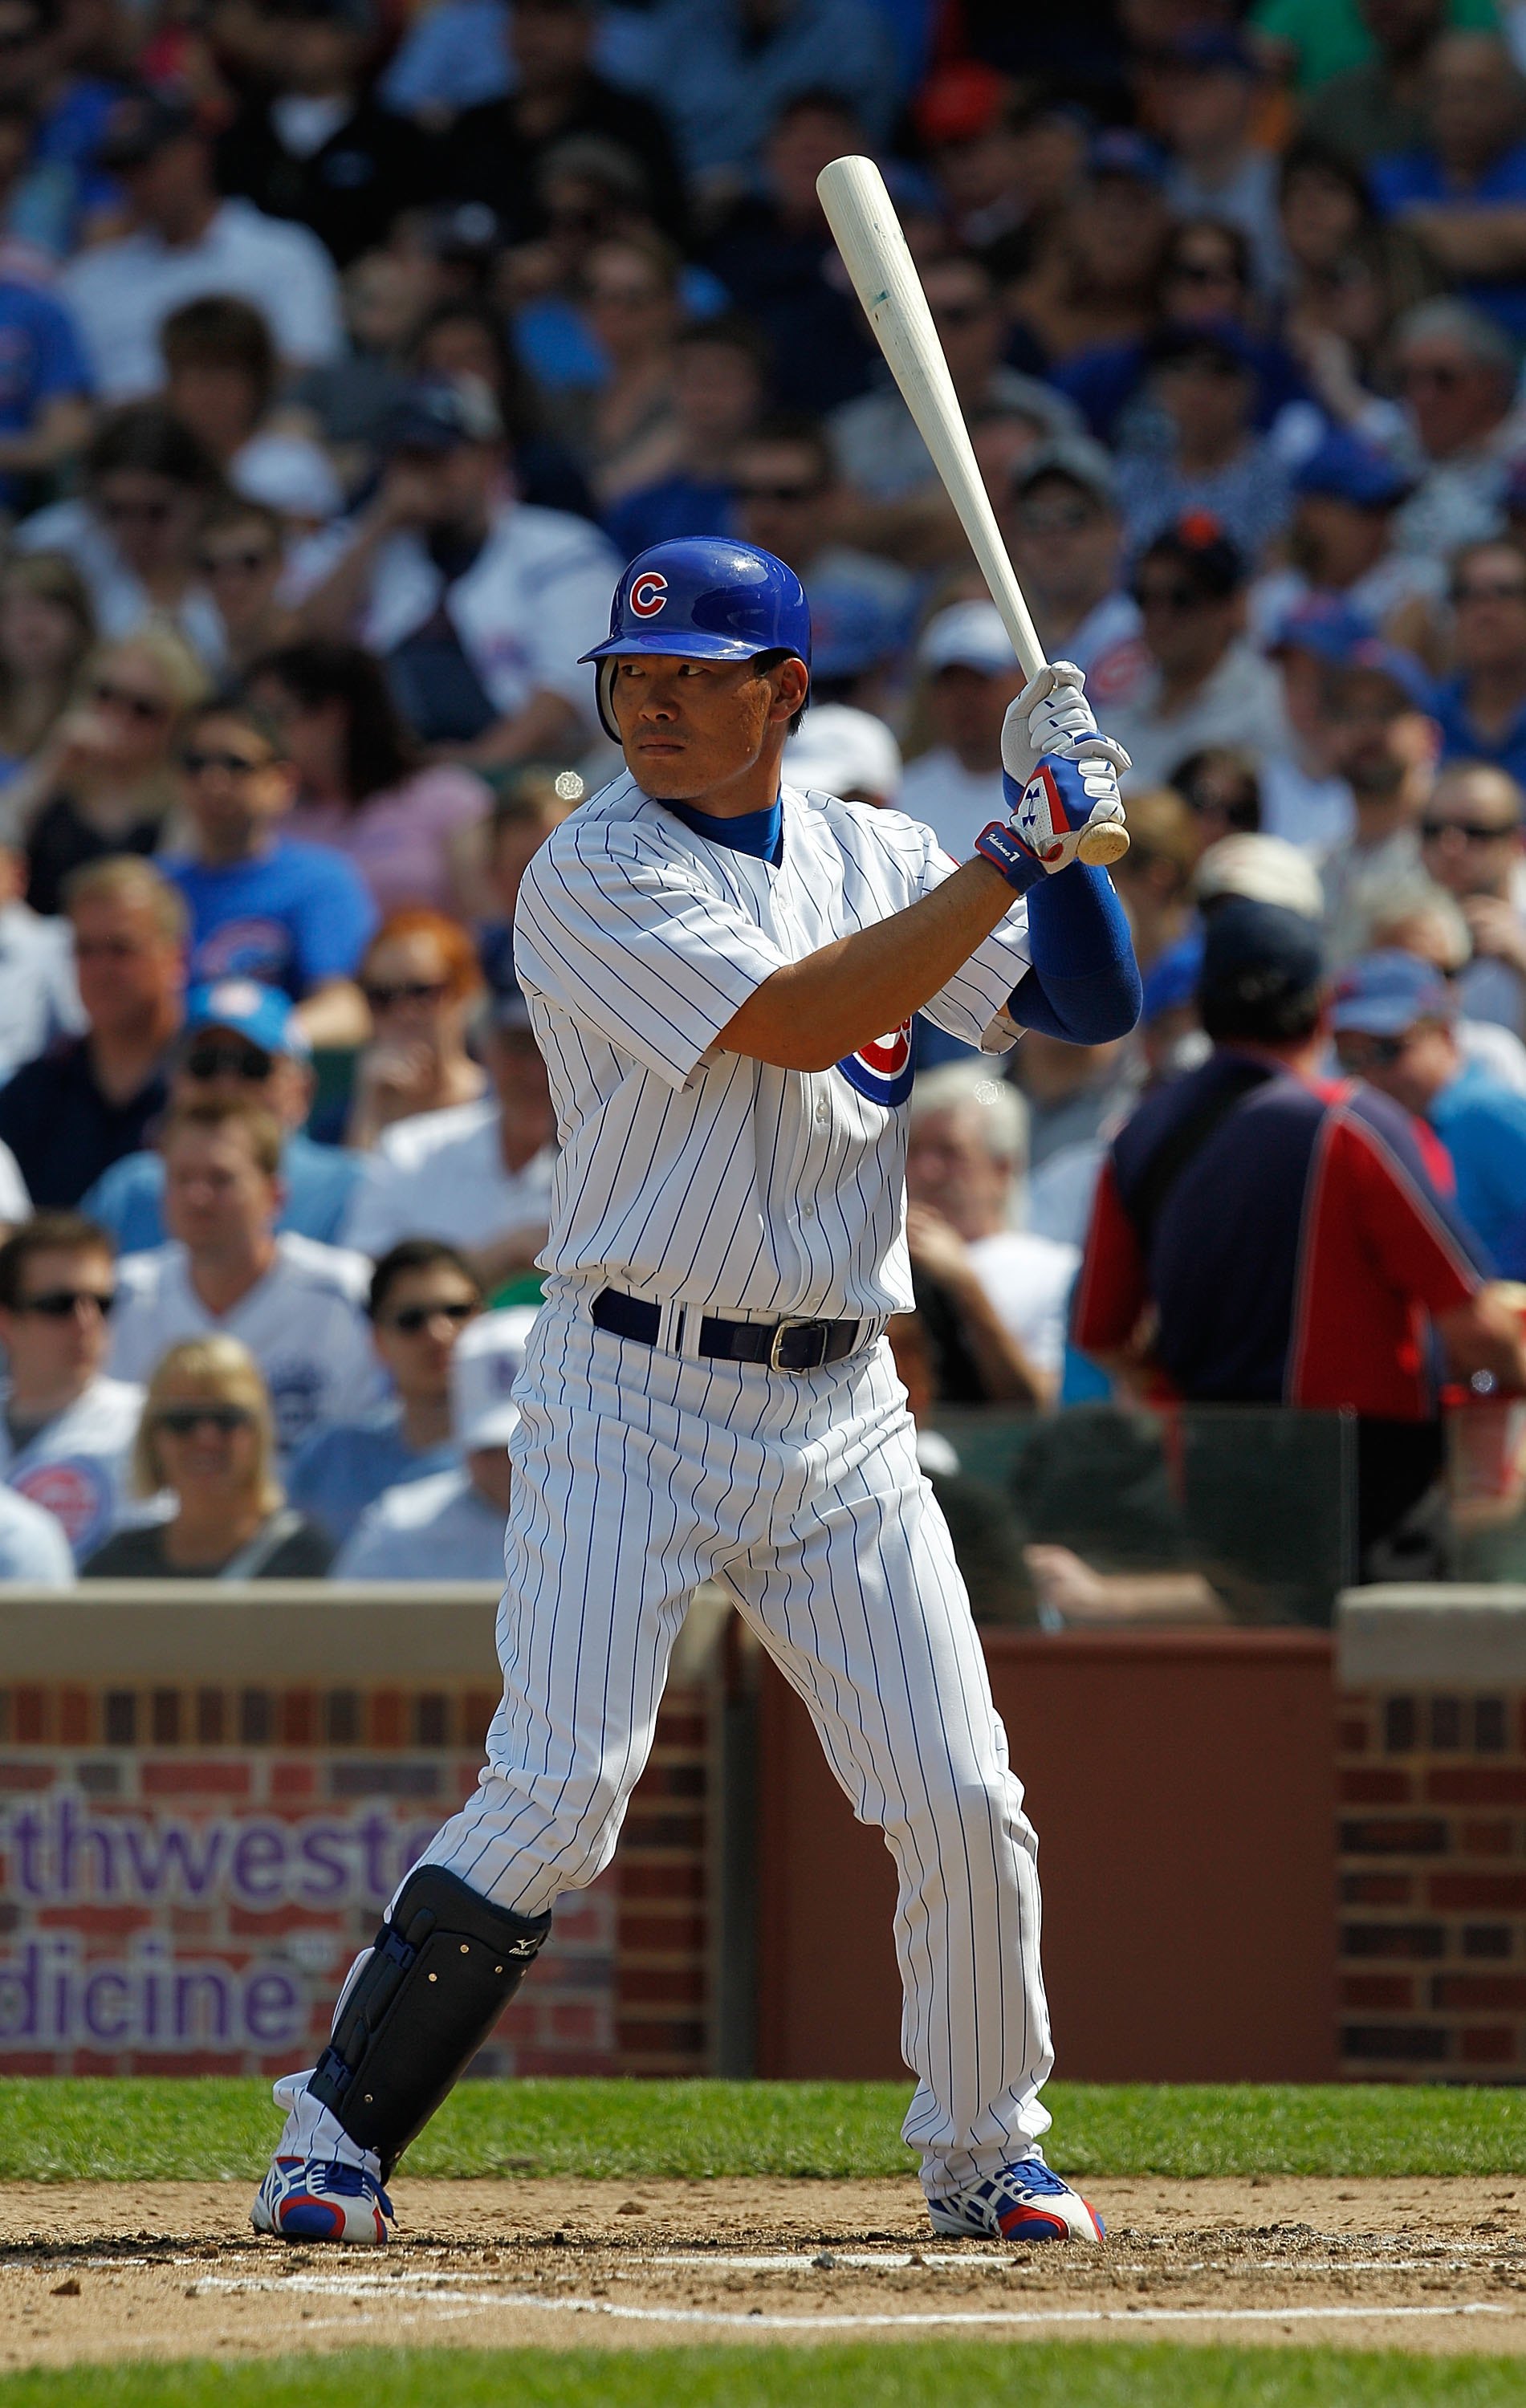 Chicago Cubs: At 43, Kosuke Fukudome is still playing in Japan